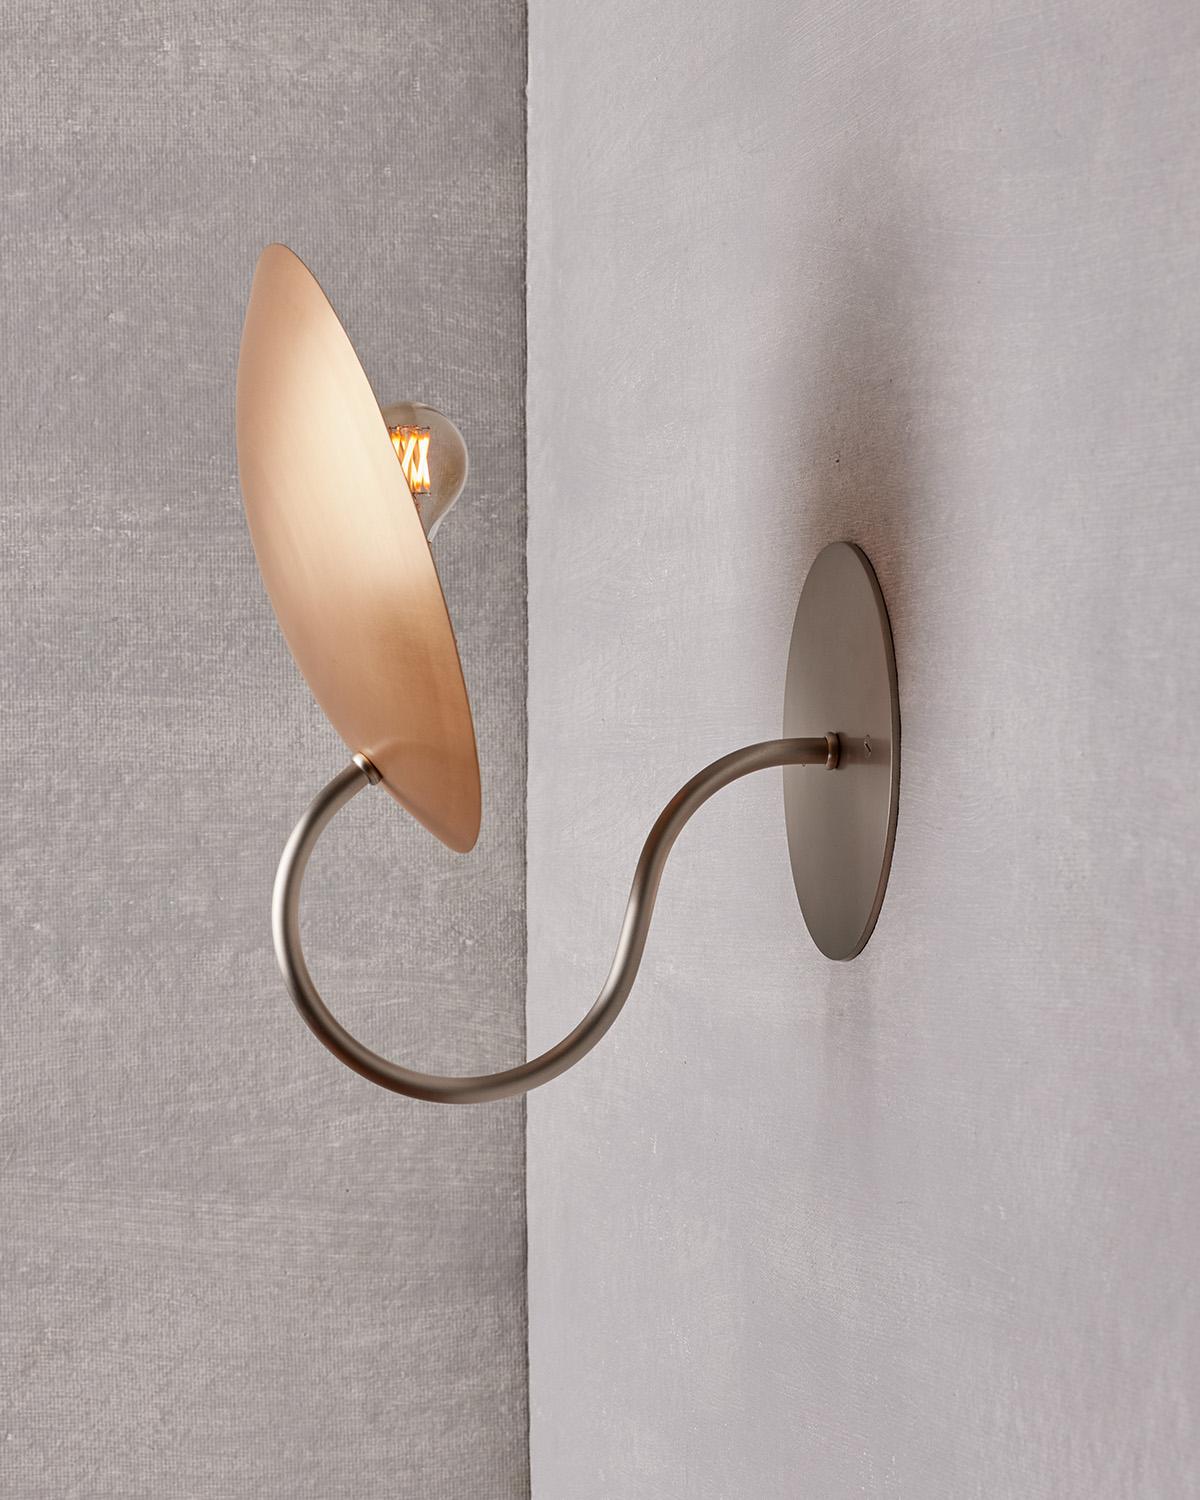 Brushed Satin Nickel and Satin Bronze Arlo Sconce In New Condition For Sale In Philadelphia, PA